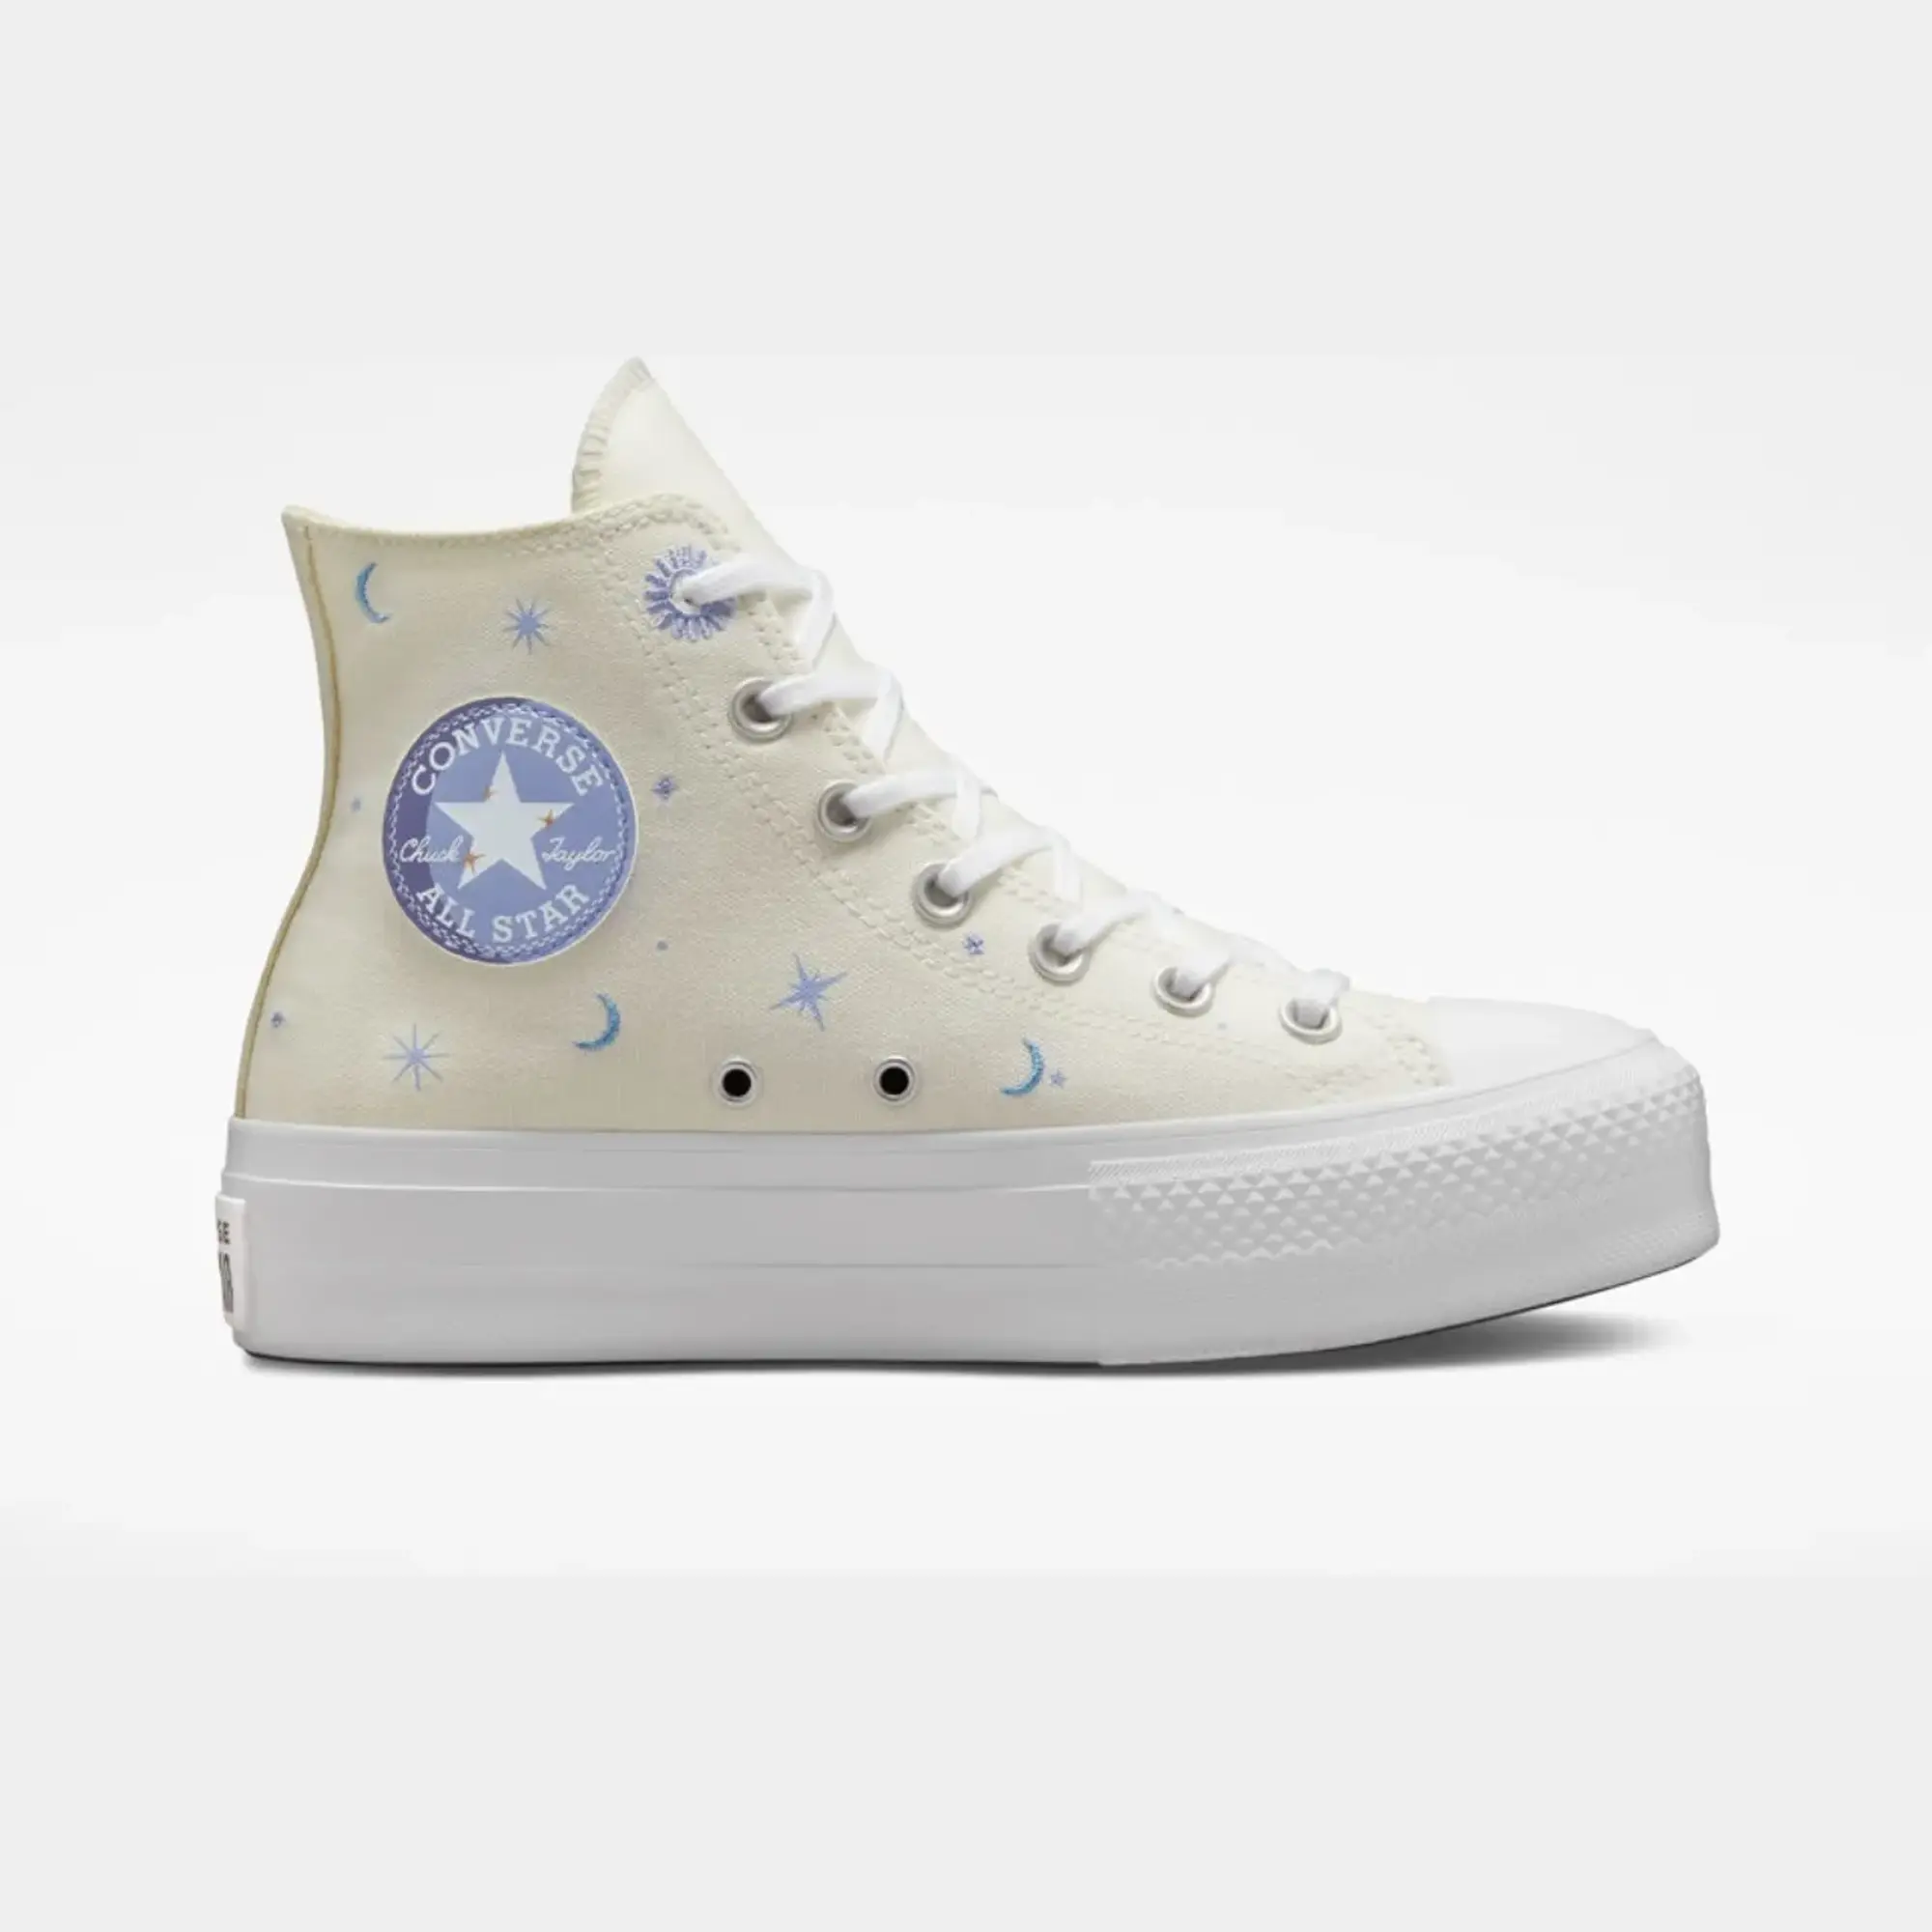 Converse lift hi timeless graphics trainers in white & purple